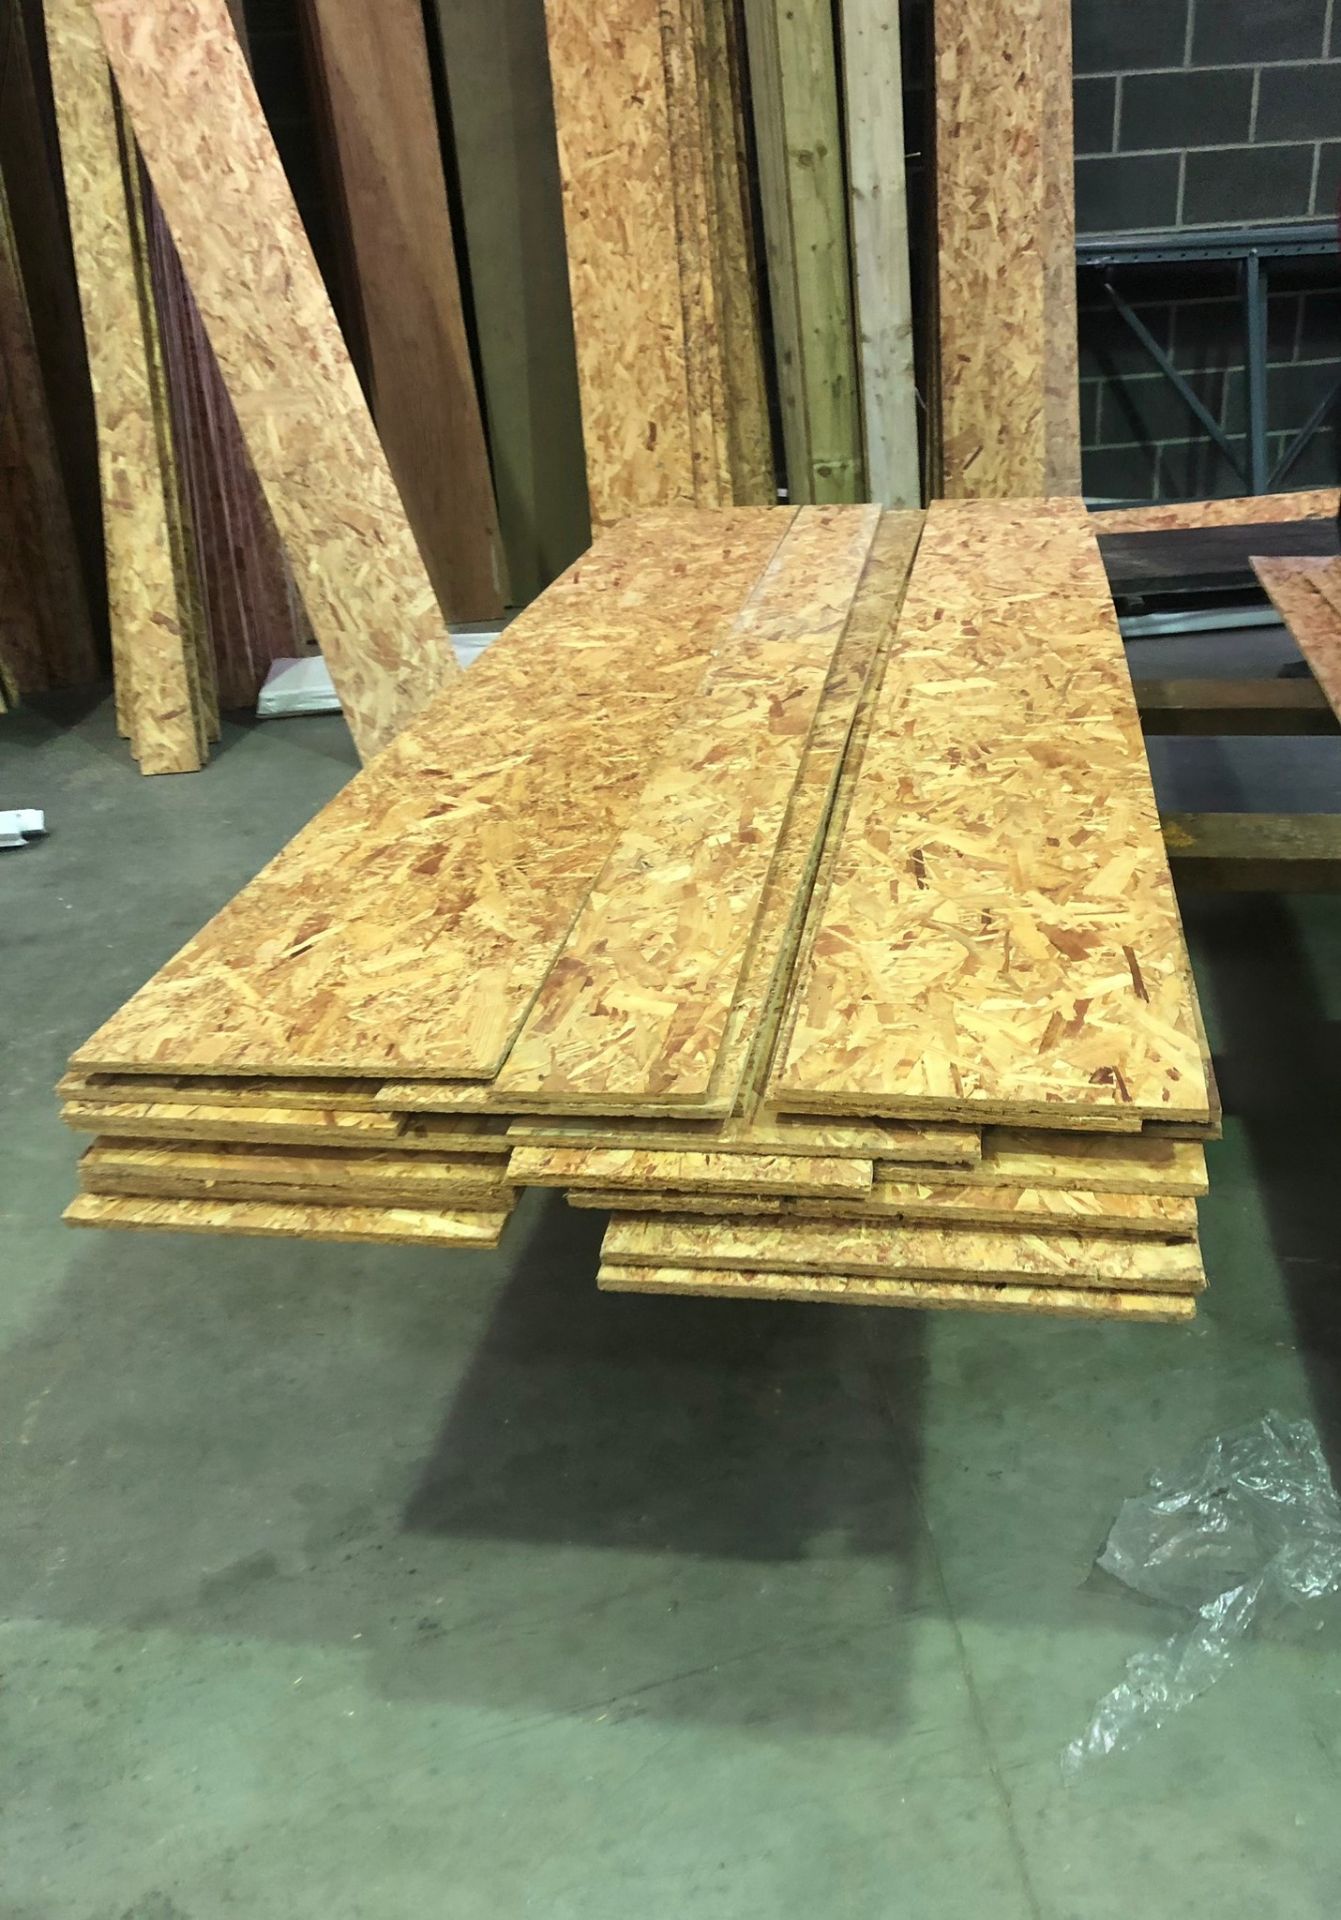 2 PALLETS OF 12MM OSB BOARD PLYWOOD RIPS BETWEEN 6INCH - 20INCH - 96 FULL SHEETS WORTH APPROX - Image 2 of 7